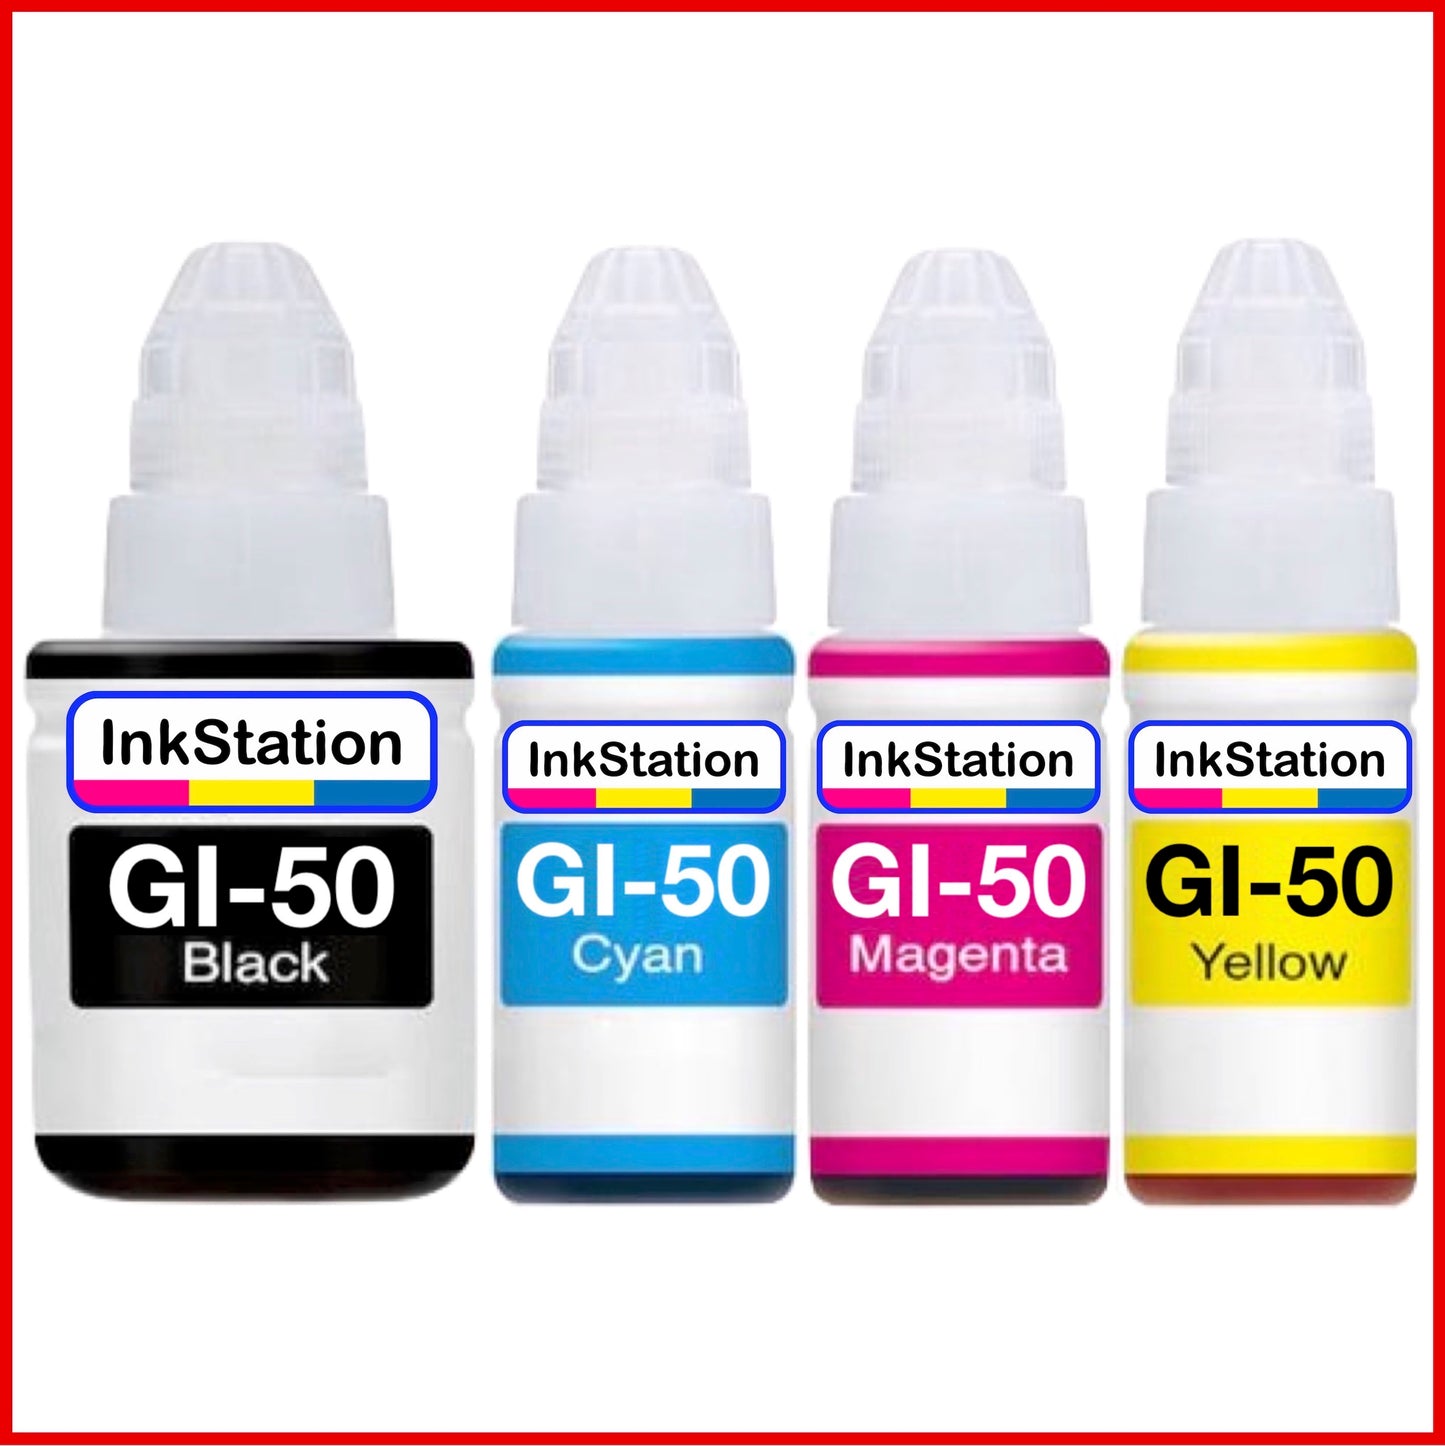 Compatible Multipack of Ink Bottles for GI-50 Canon Pixma (135/70ml) B/C/M/Y